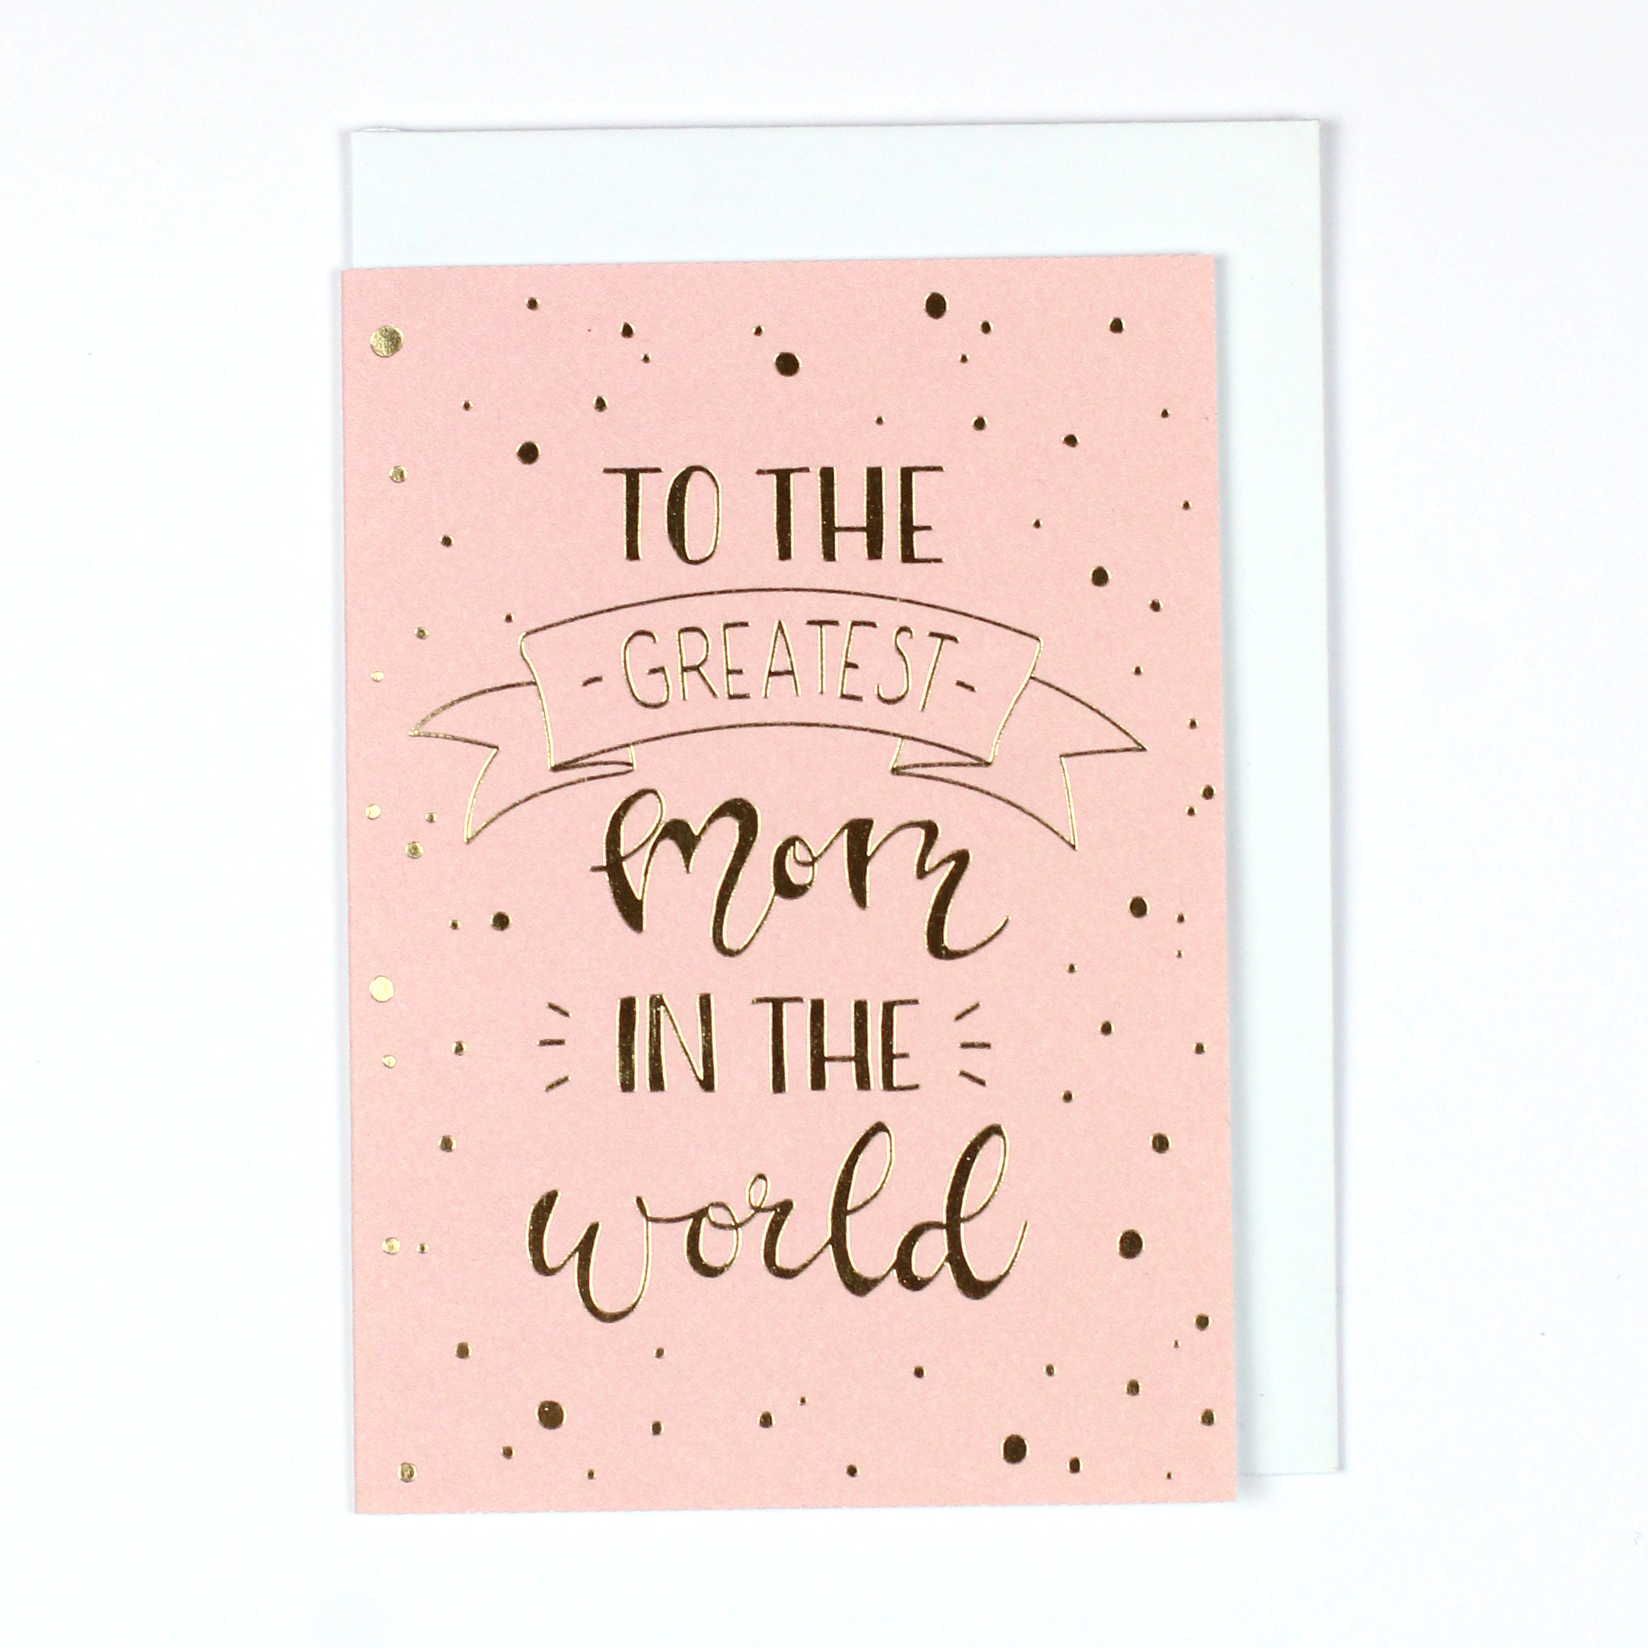 "To the greatest mom in the world" Greeting Card